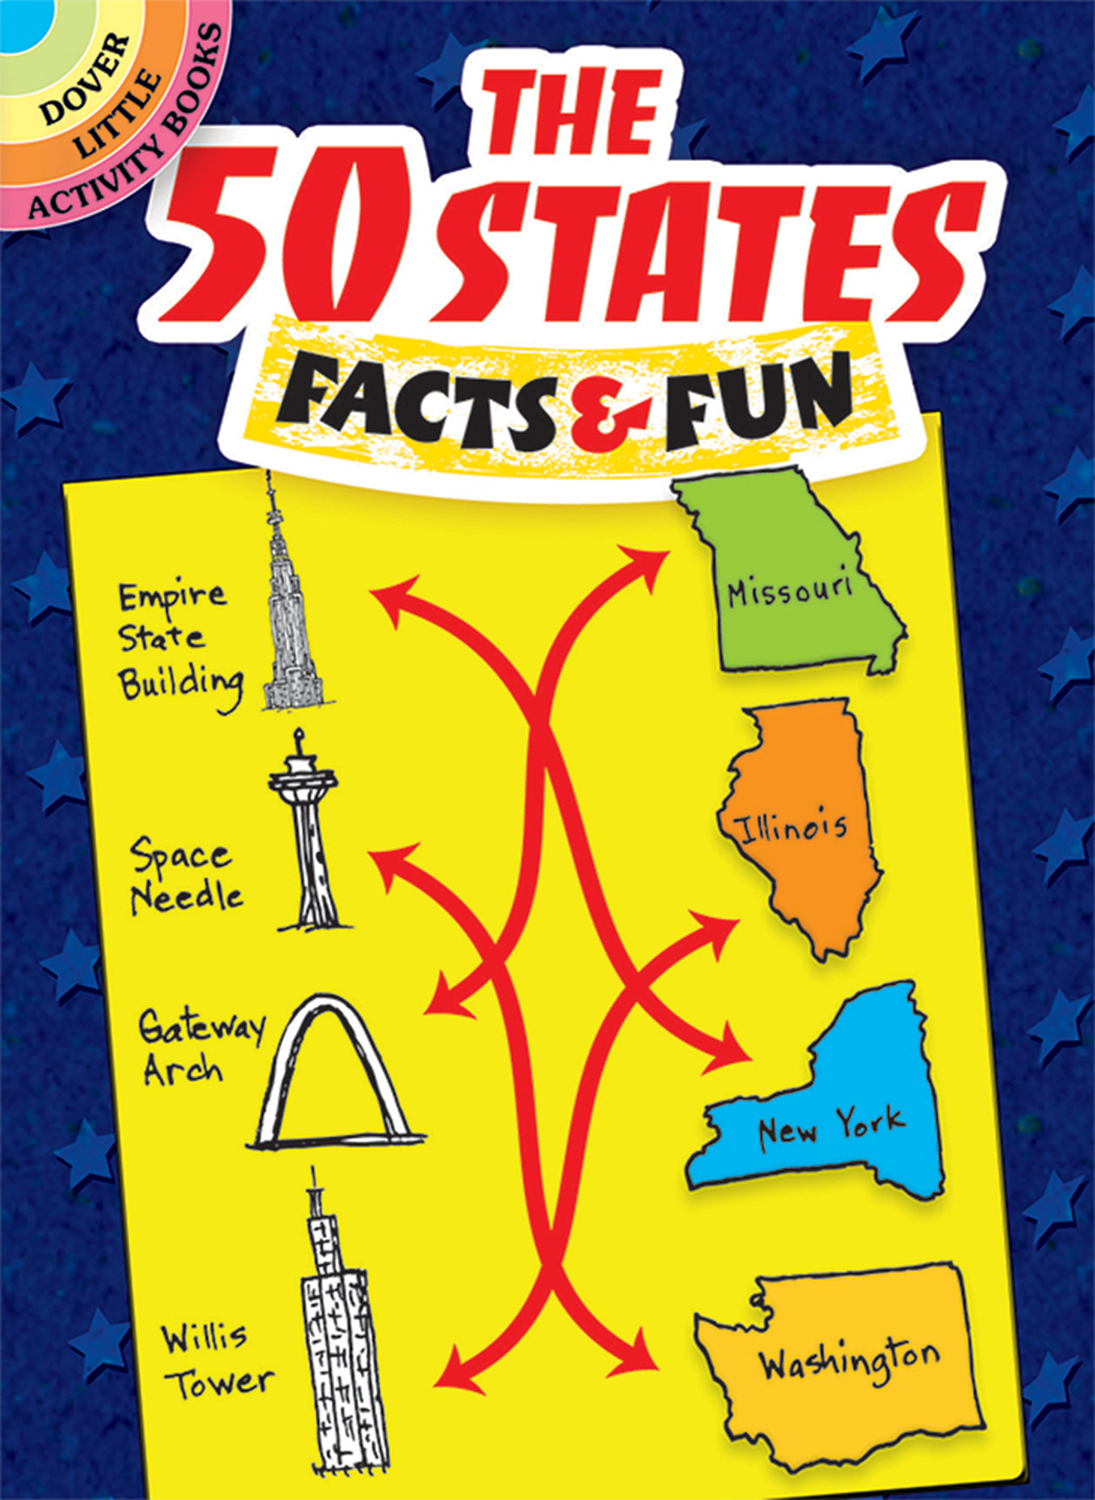 The 50 States Facts Fun Franklin s Toys